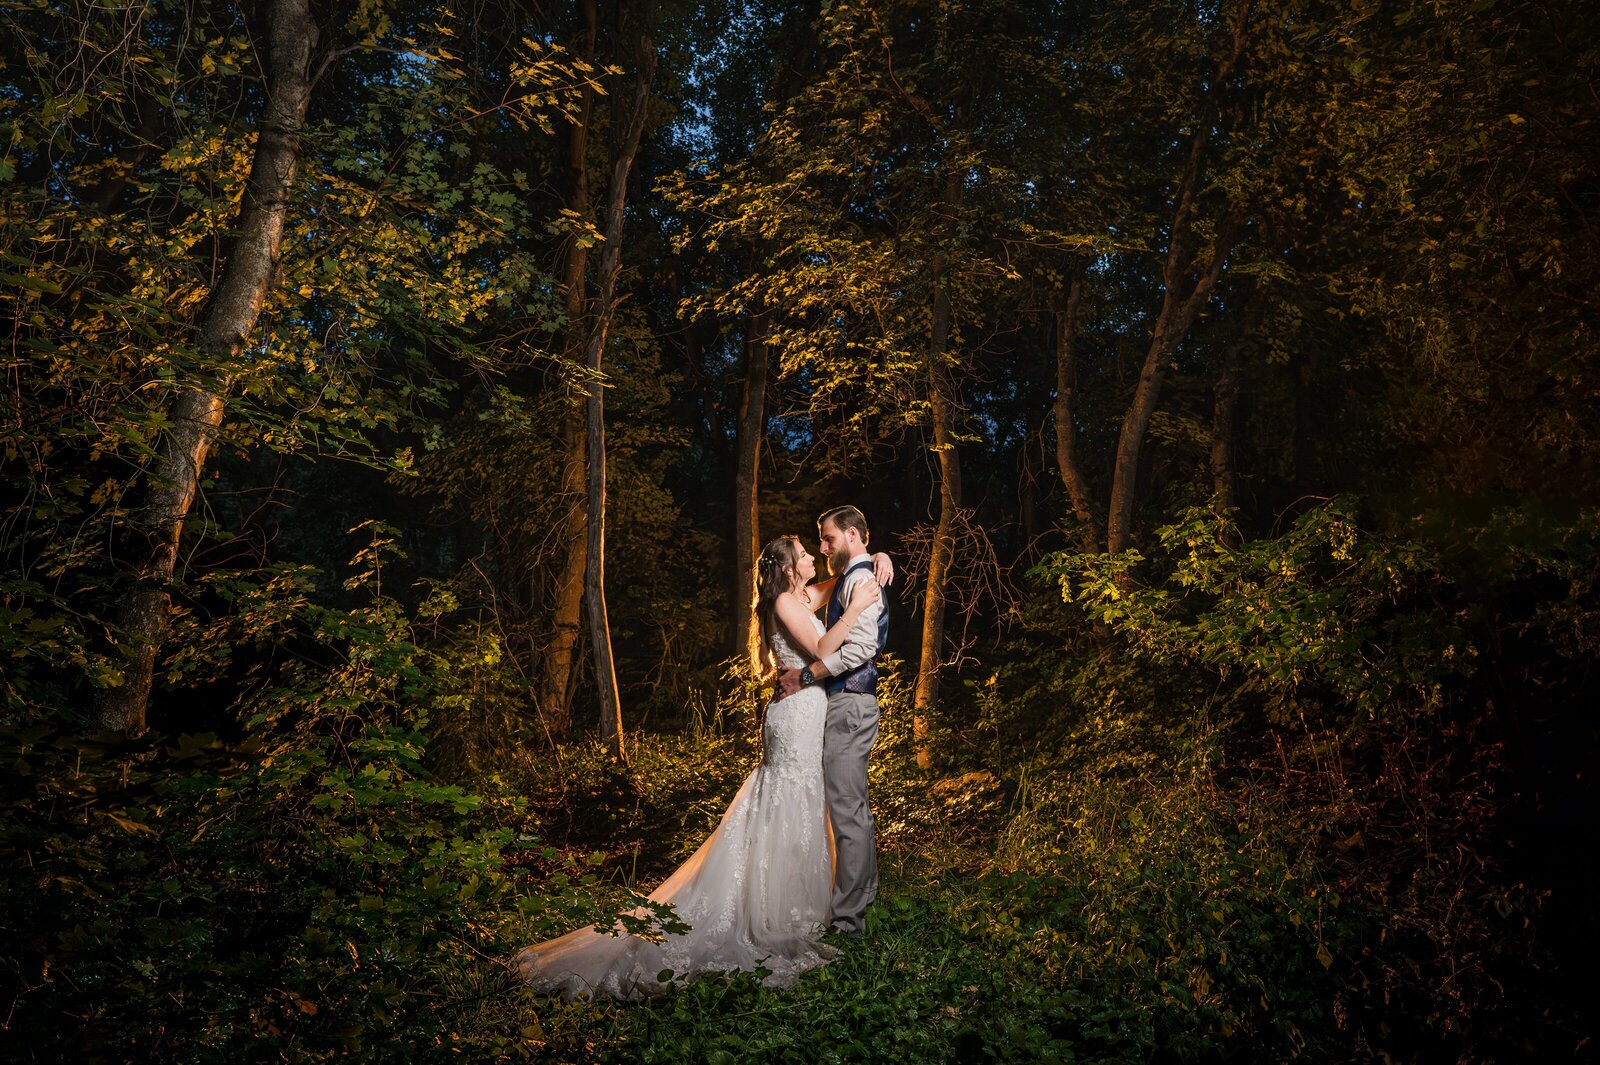 Bride and groom in the forest at night surrounded by trees.